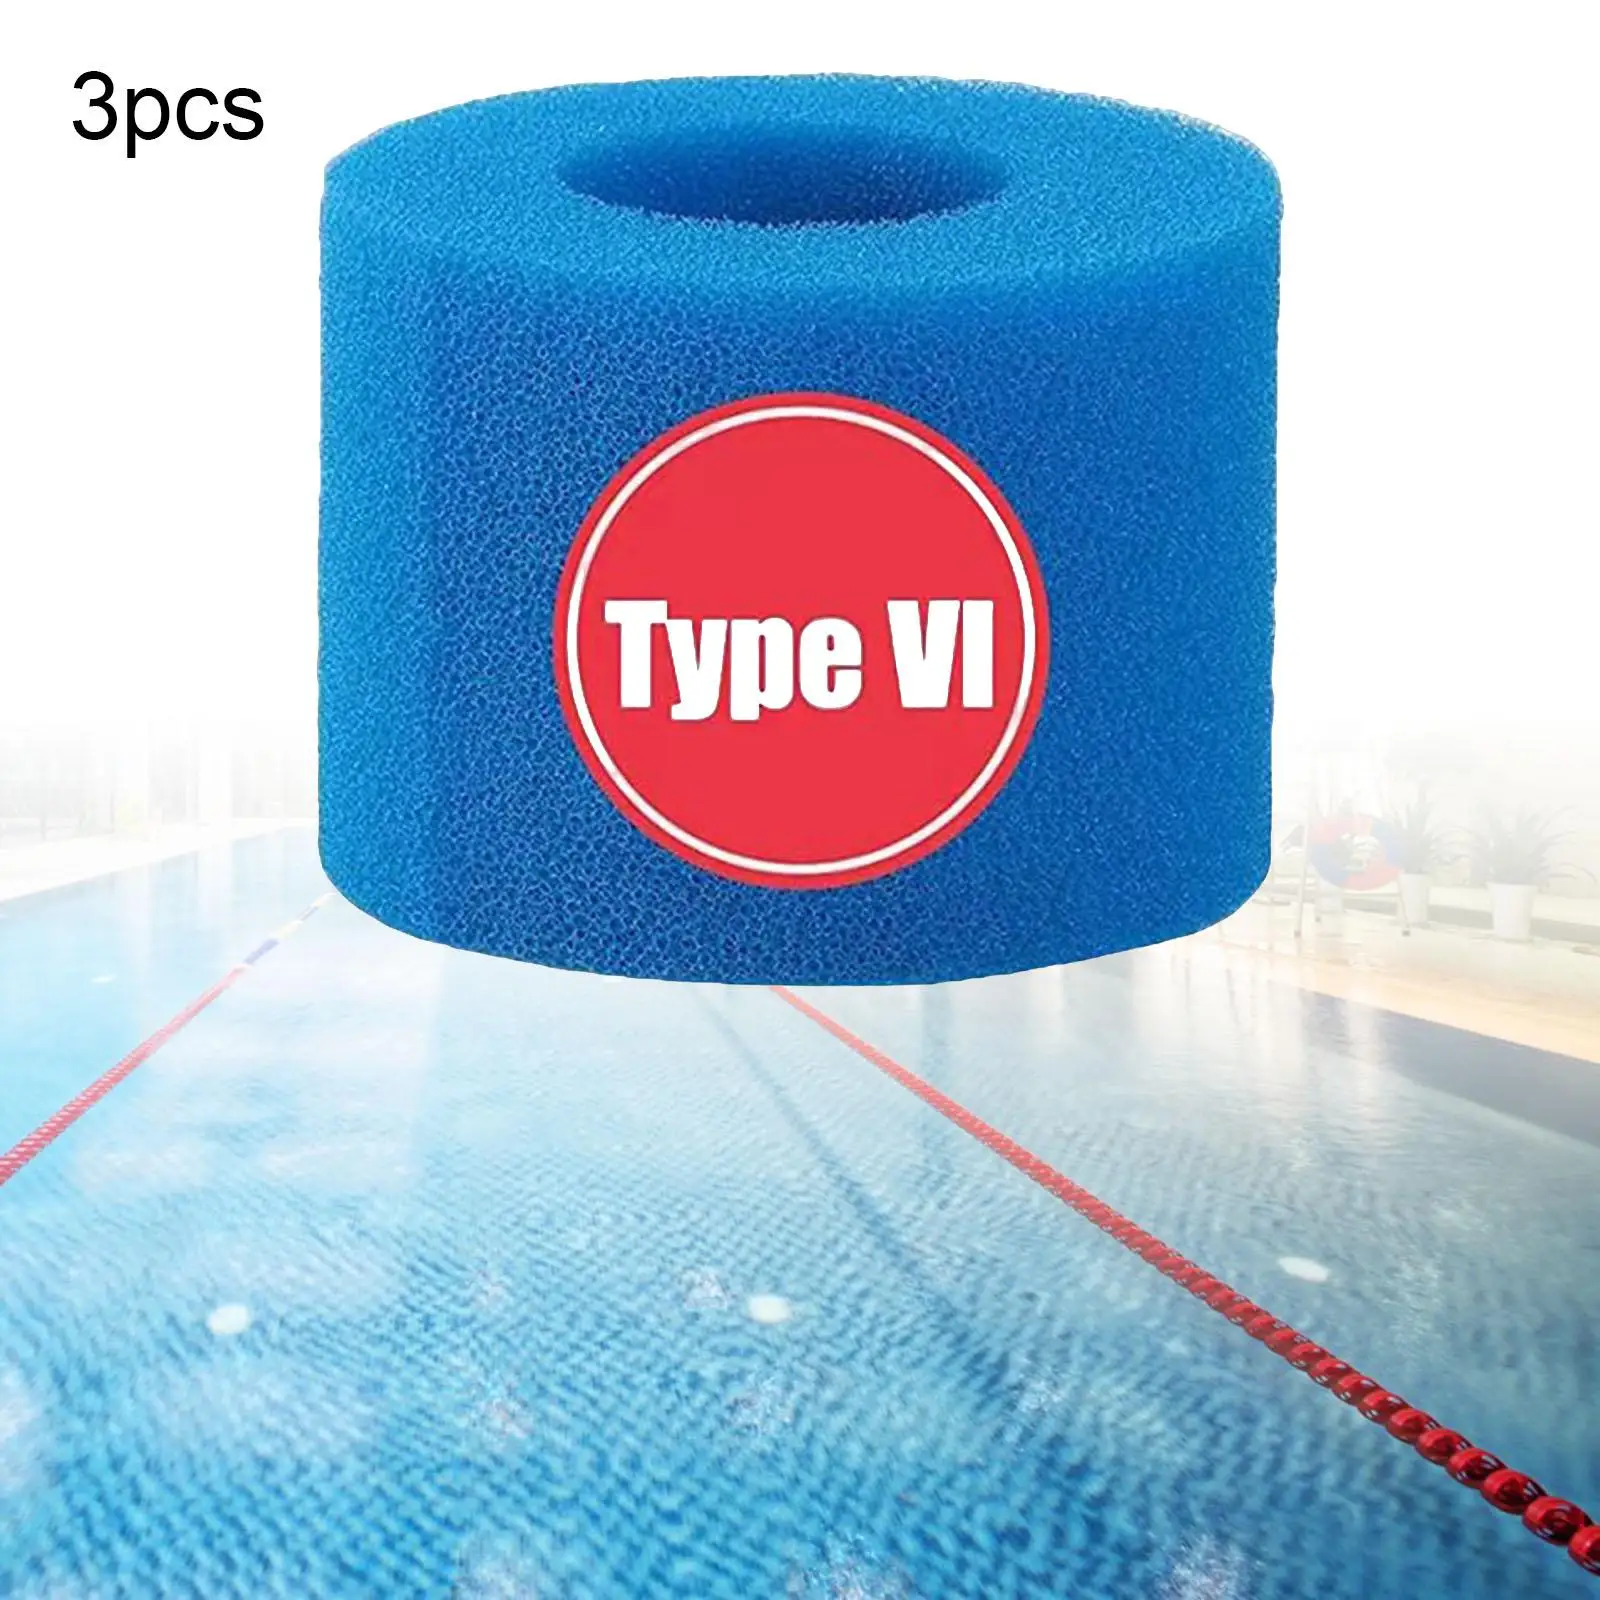 3Pcs Pool Filter Foam Sponge Cartridge Pool Cleaner Foam for Type V1 Summer Wave Pools and above Ground Swimming Pools